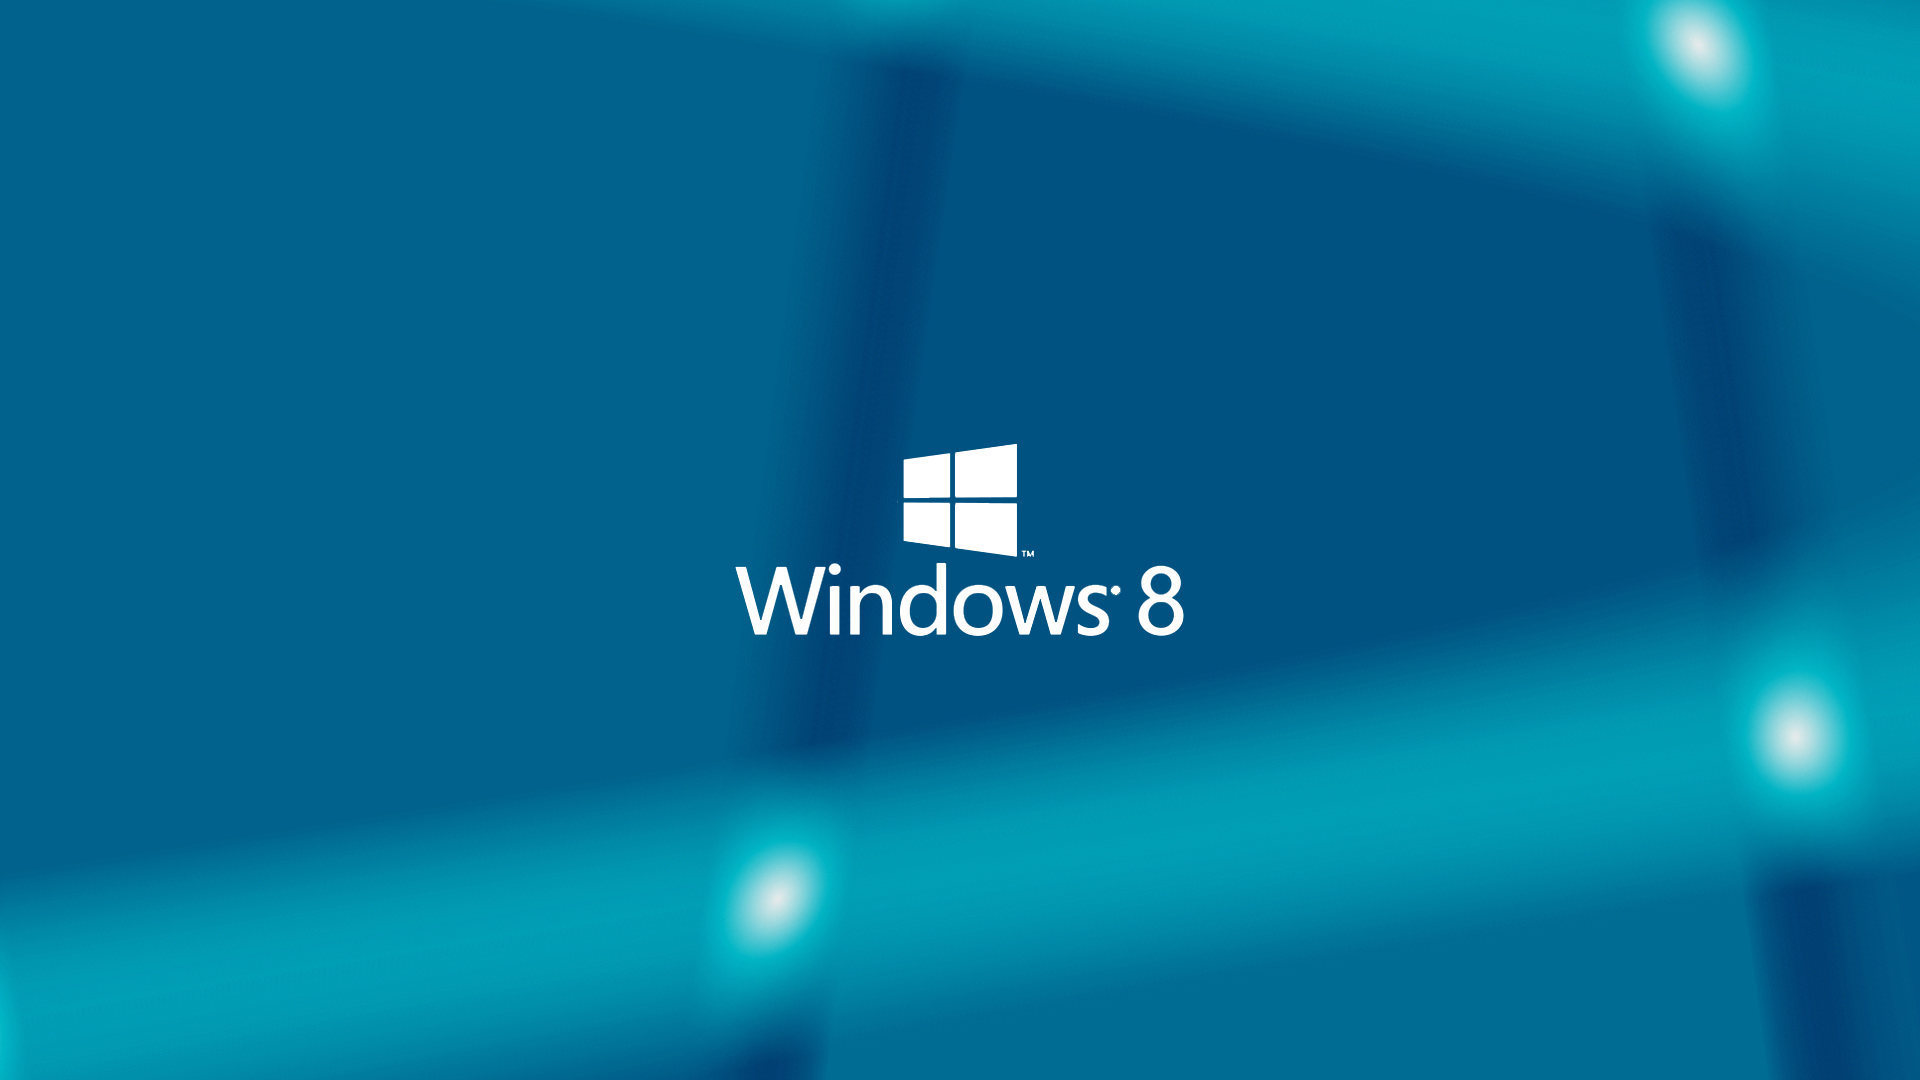 Download these HD Windows Wallpaper Images